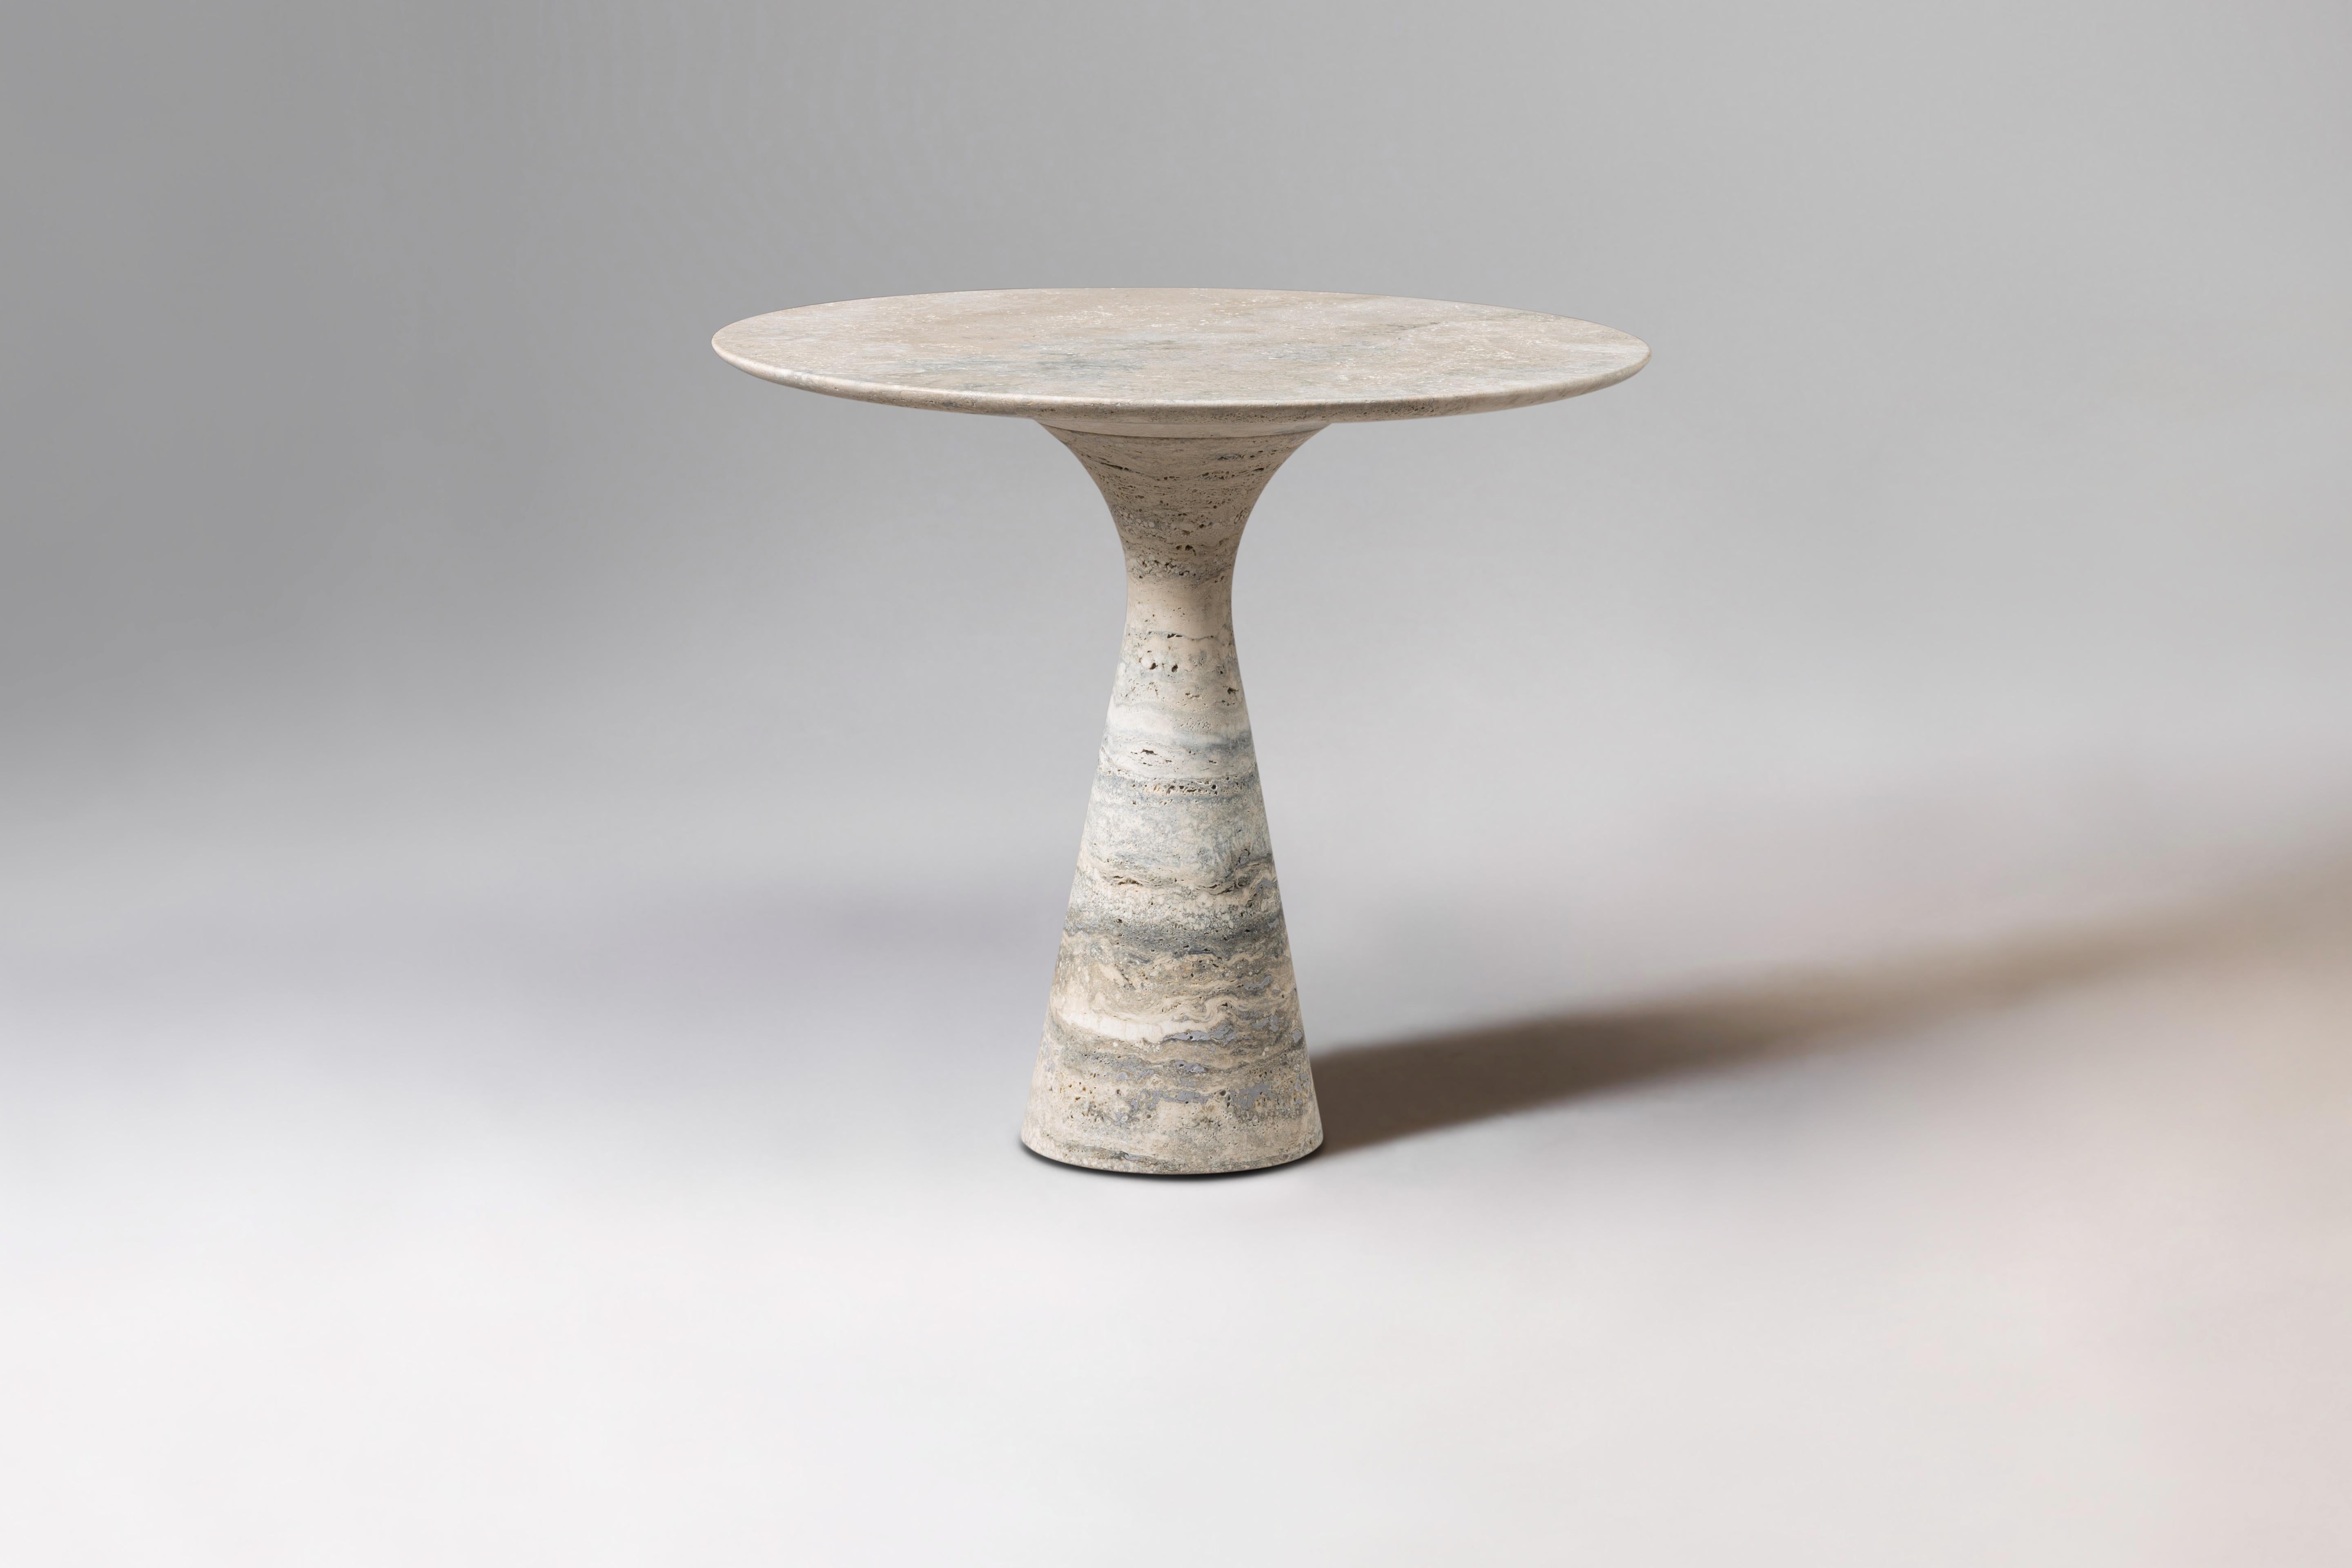 Travertino Silver Refined Contemporary Marble Side Table 62/45
Dimensions: Diameter 45 x height 62 cm
Materials: Travertino Silver

Angelo is the essence of a round table in natural stone, a sculptural shape in robust material with elegant lines and